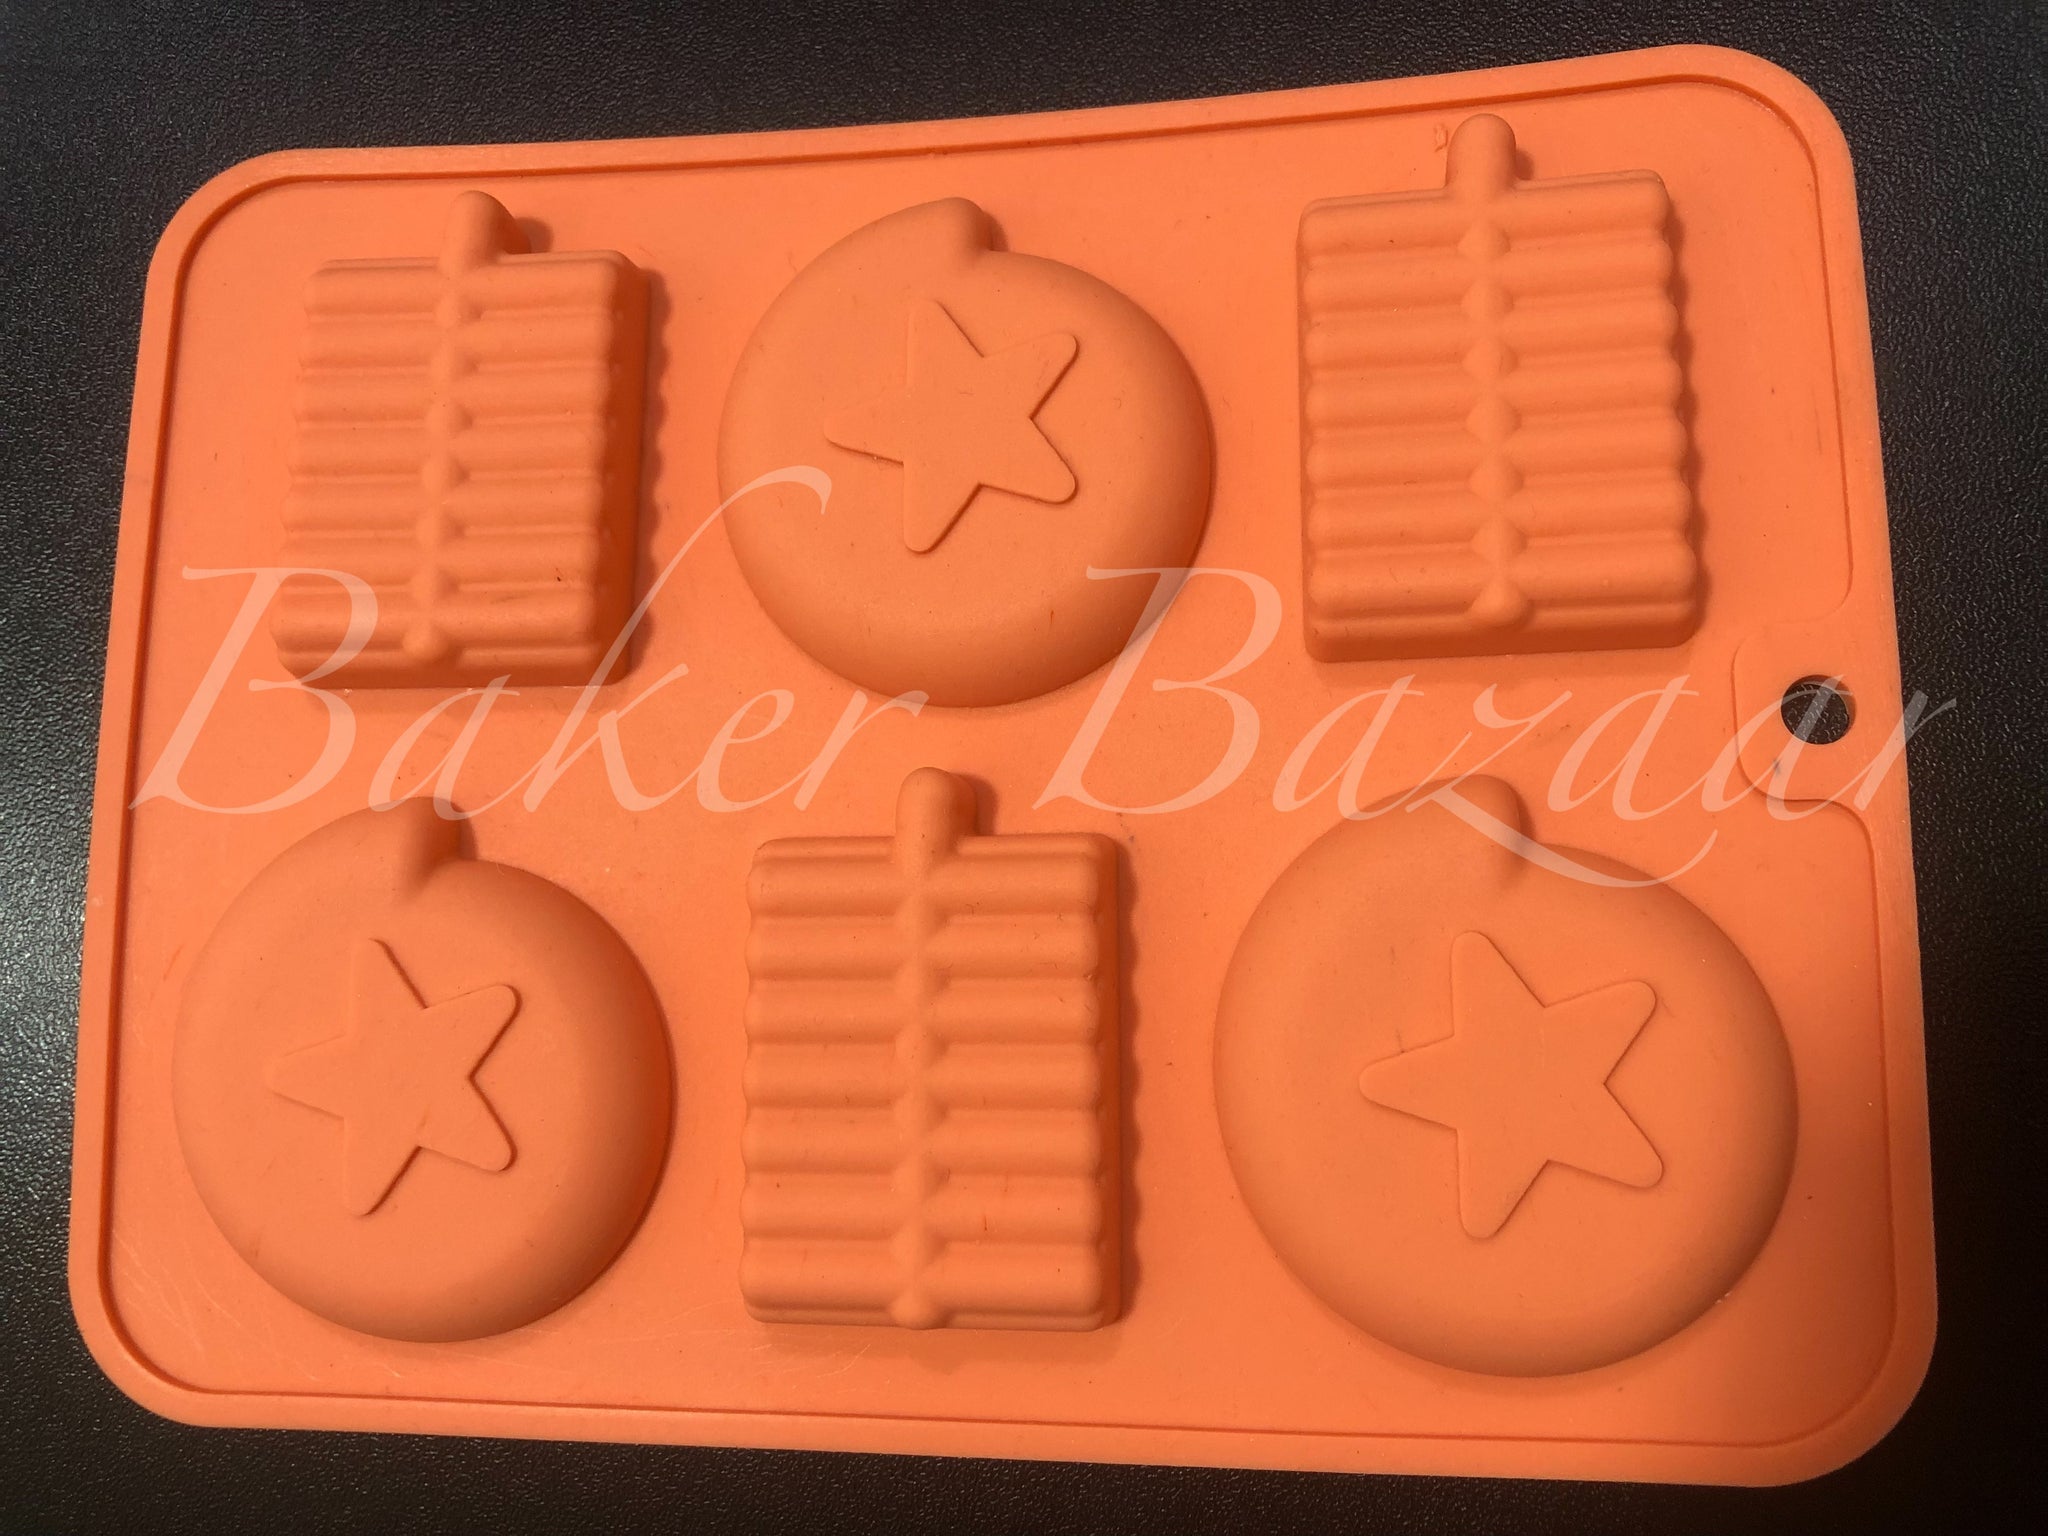 Diwali Special Chocolate Mould Bombs & Chakri Shape 6 Cavity Silicone Mould- Diwali Crackers